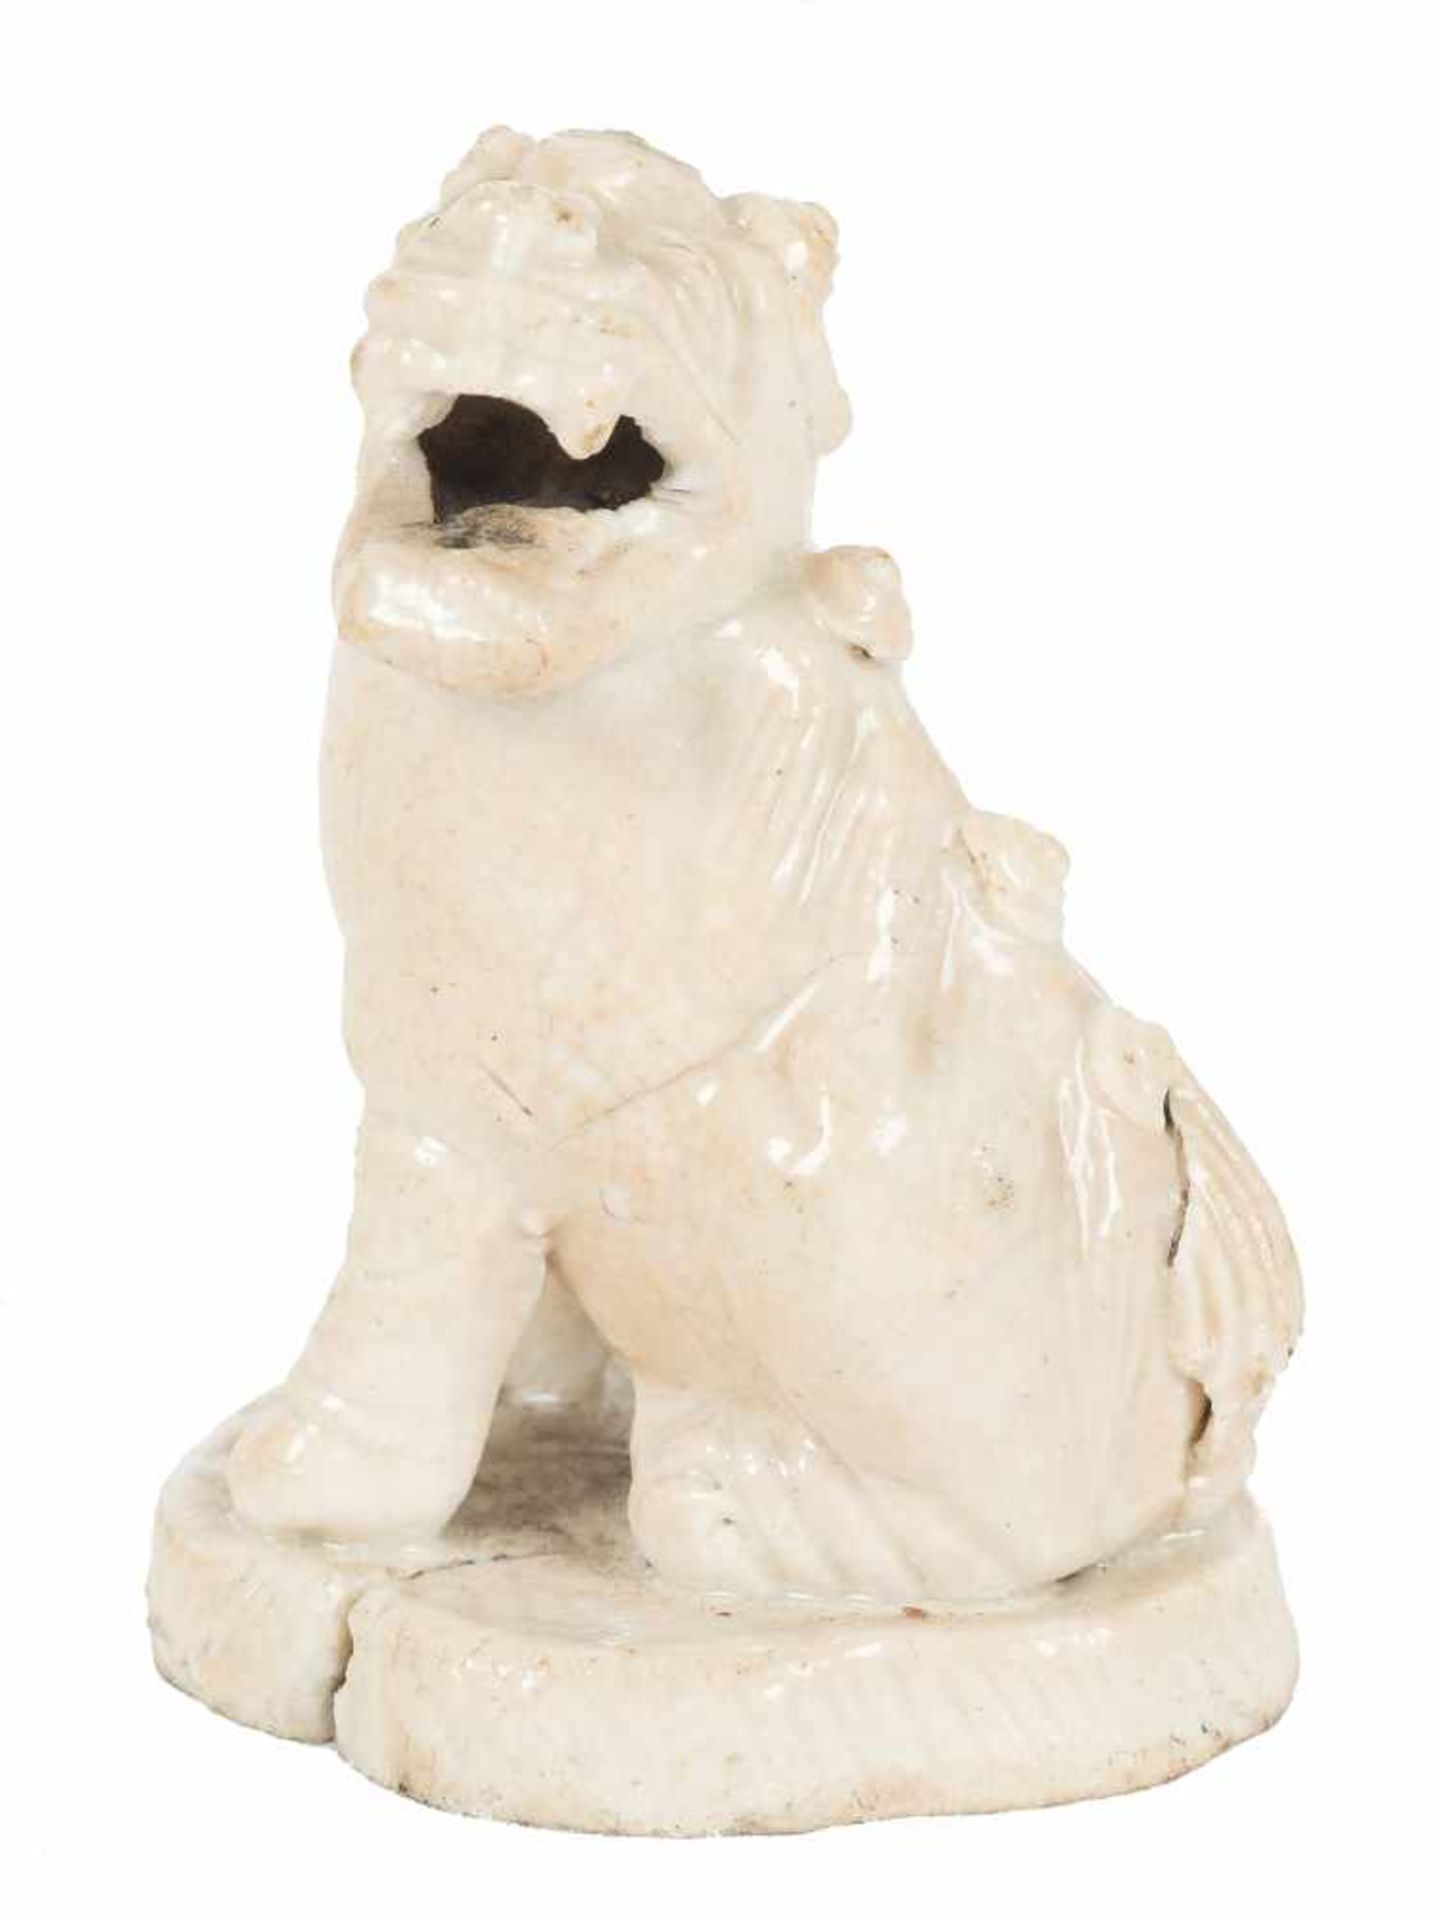 Kylin in white porcelain. China. Ming Period (1368-1644)5,5 x 4 x 3 cm.